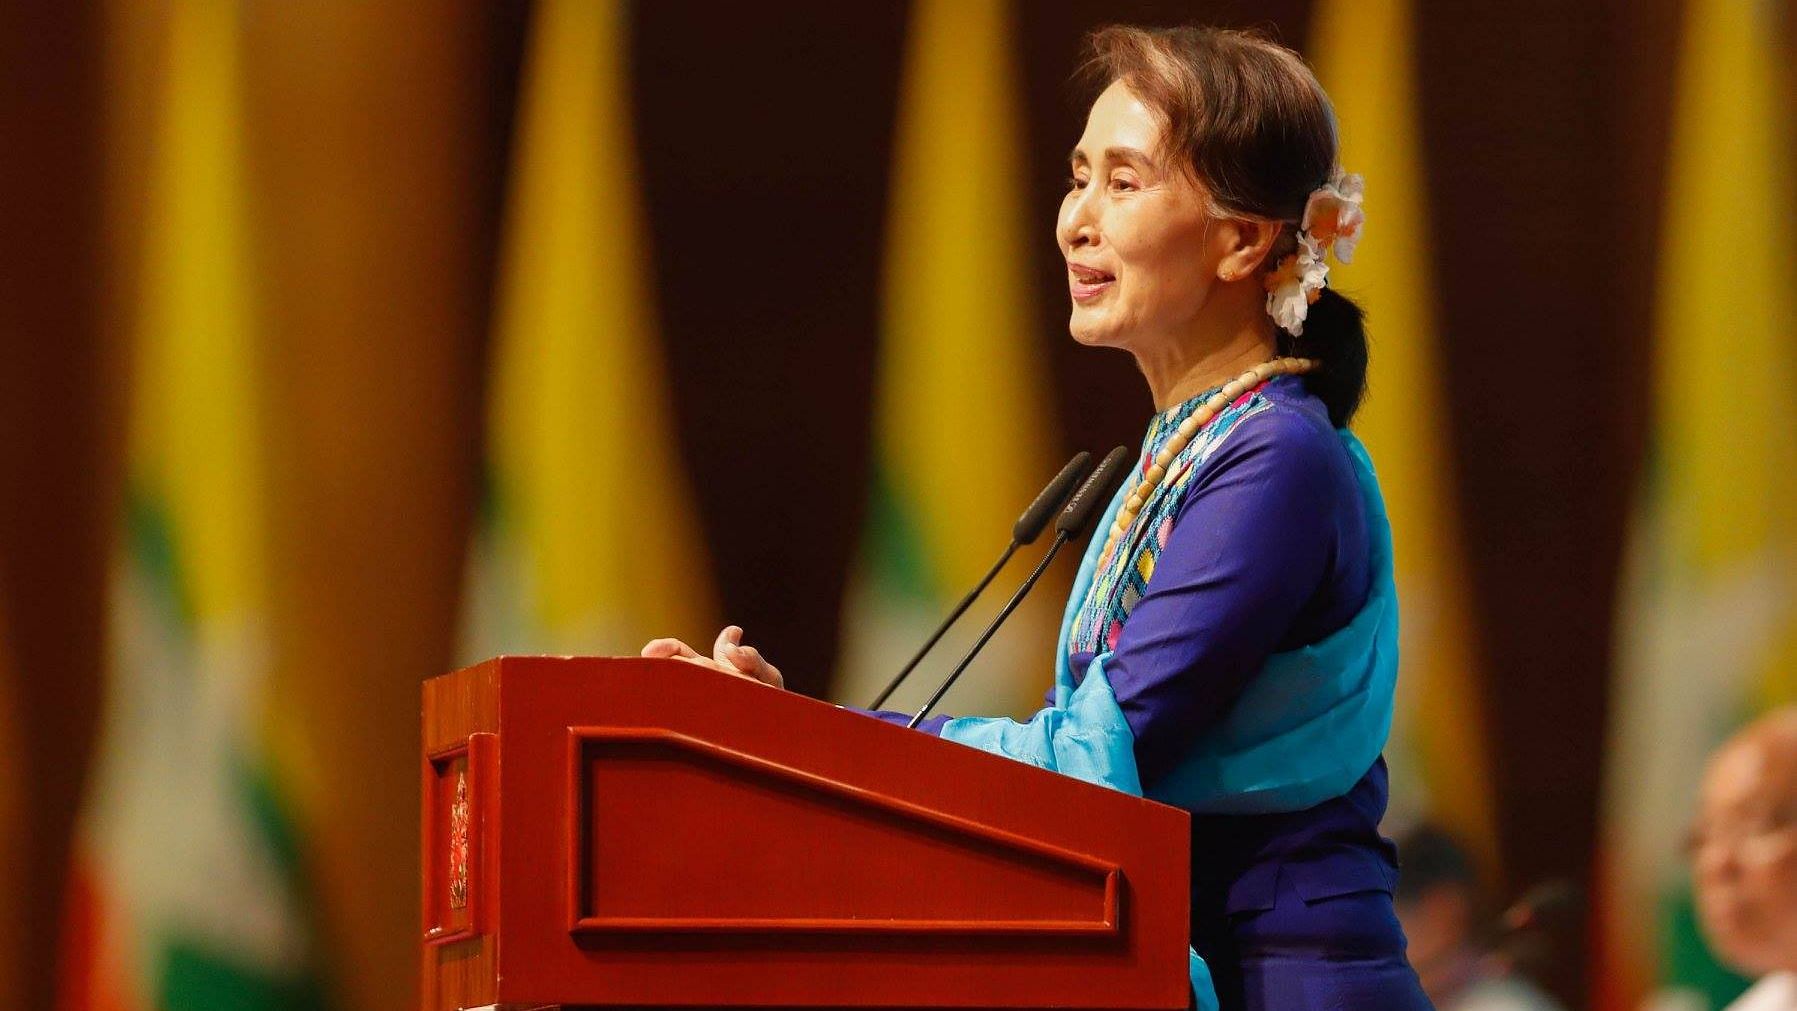 <div class="paragraphs"><p><a href="https://www.thequint.com/topic/myanmar">Myanmar</a>'s ousted leader <a href="https://www.thequint.com/topic/aung-san-suu-kyi">Aung San Suu Kyi</a> was sentenced to three years in prison with hard labour after she was found guilty of electoral fraud on Friday, 2 September.</p></div>